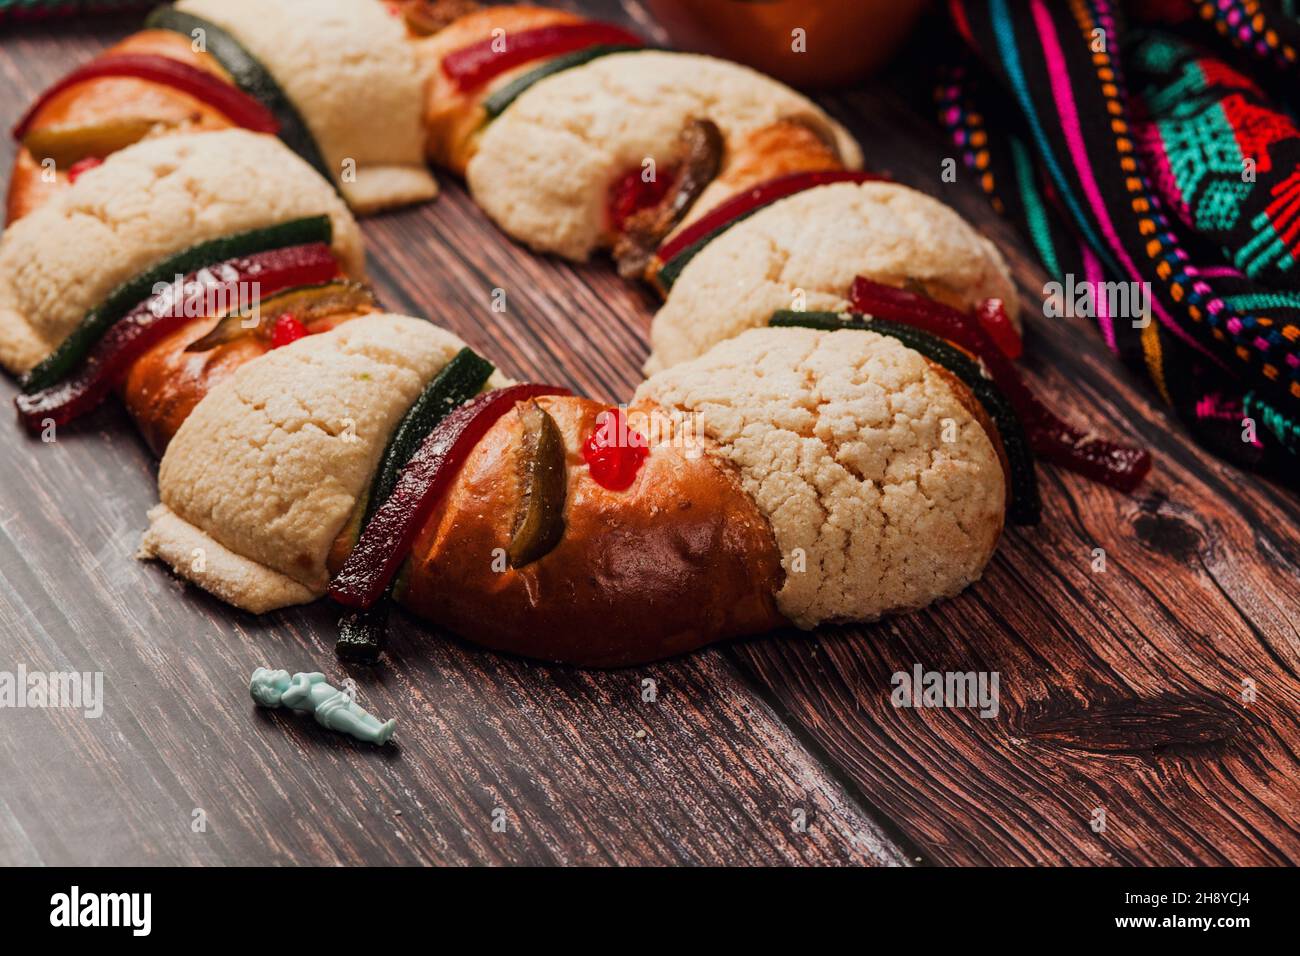 Rosca de reyes or Epiphany cake for kings day on wooden table in Mexico Latin America Stock Photo